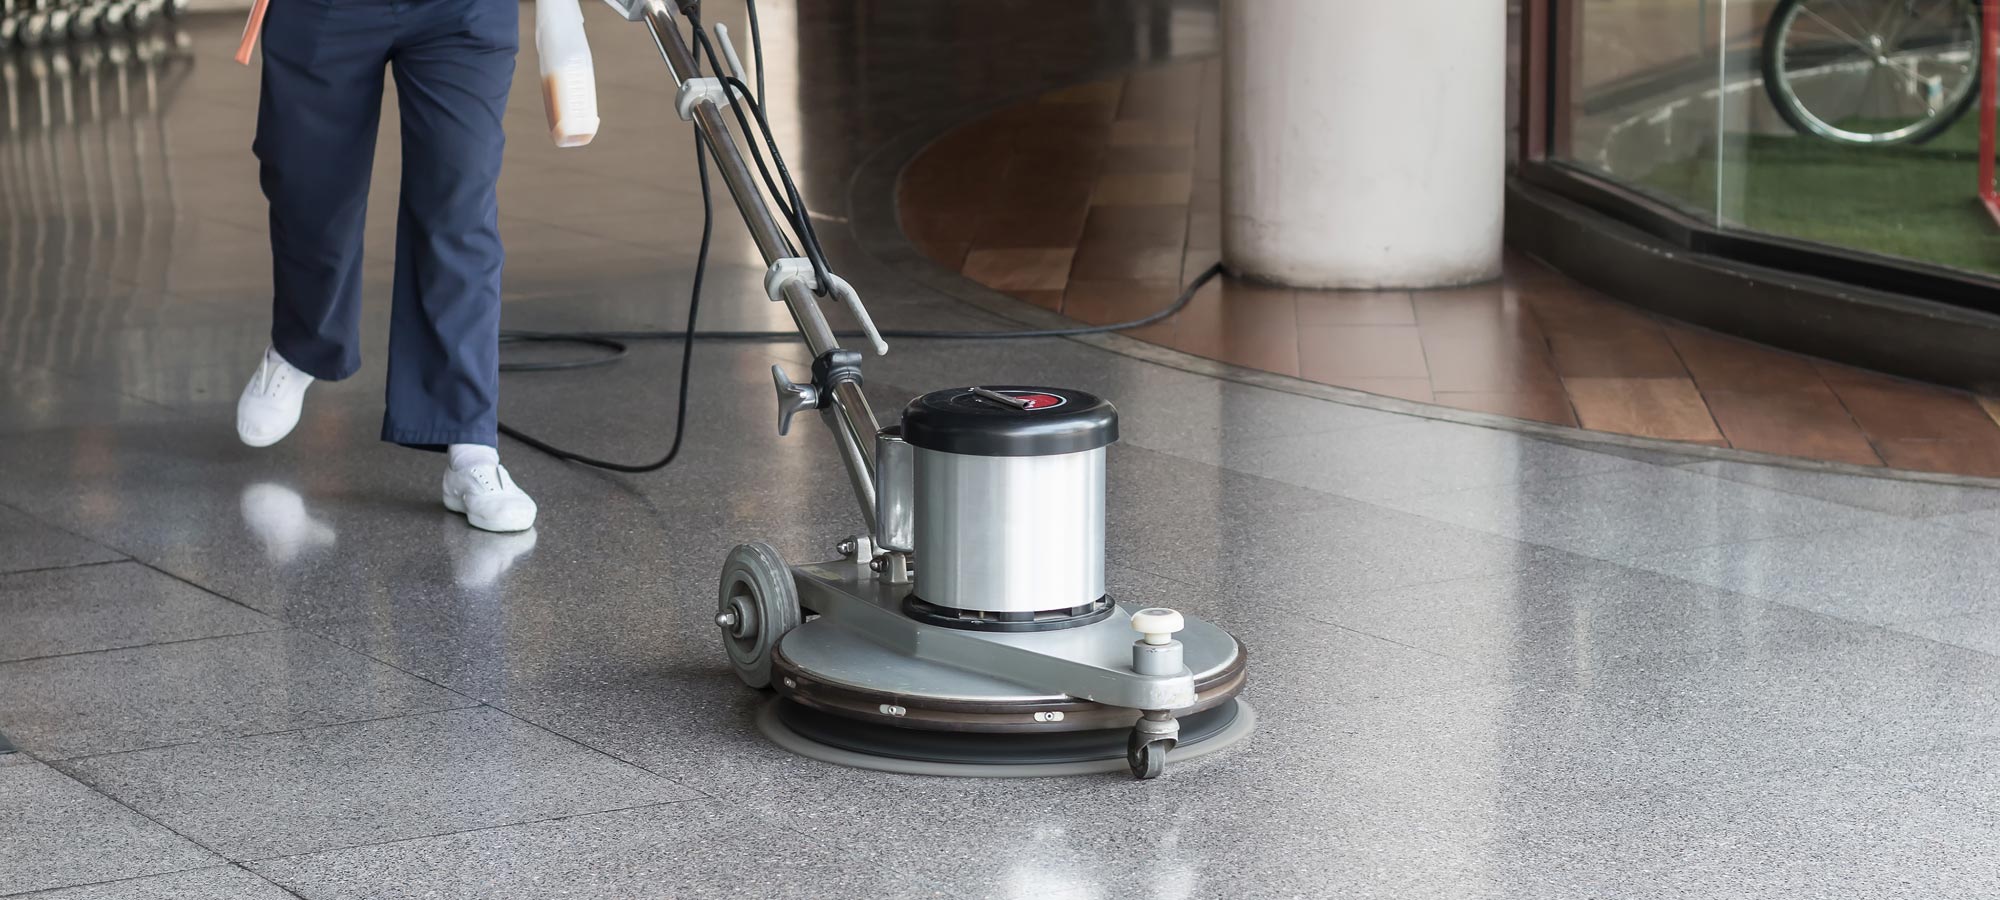 IGS Immobilien Grundstücksservice Magdeburg, Woman cleaning the floor with polishing machine 